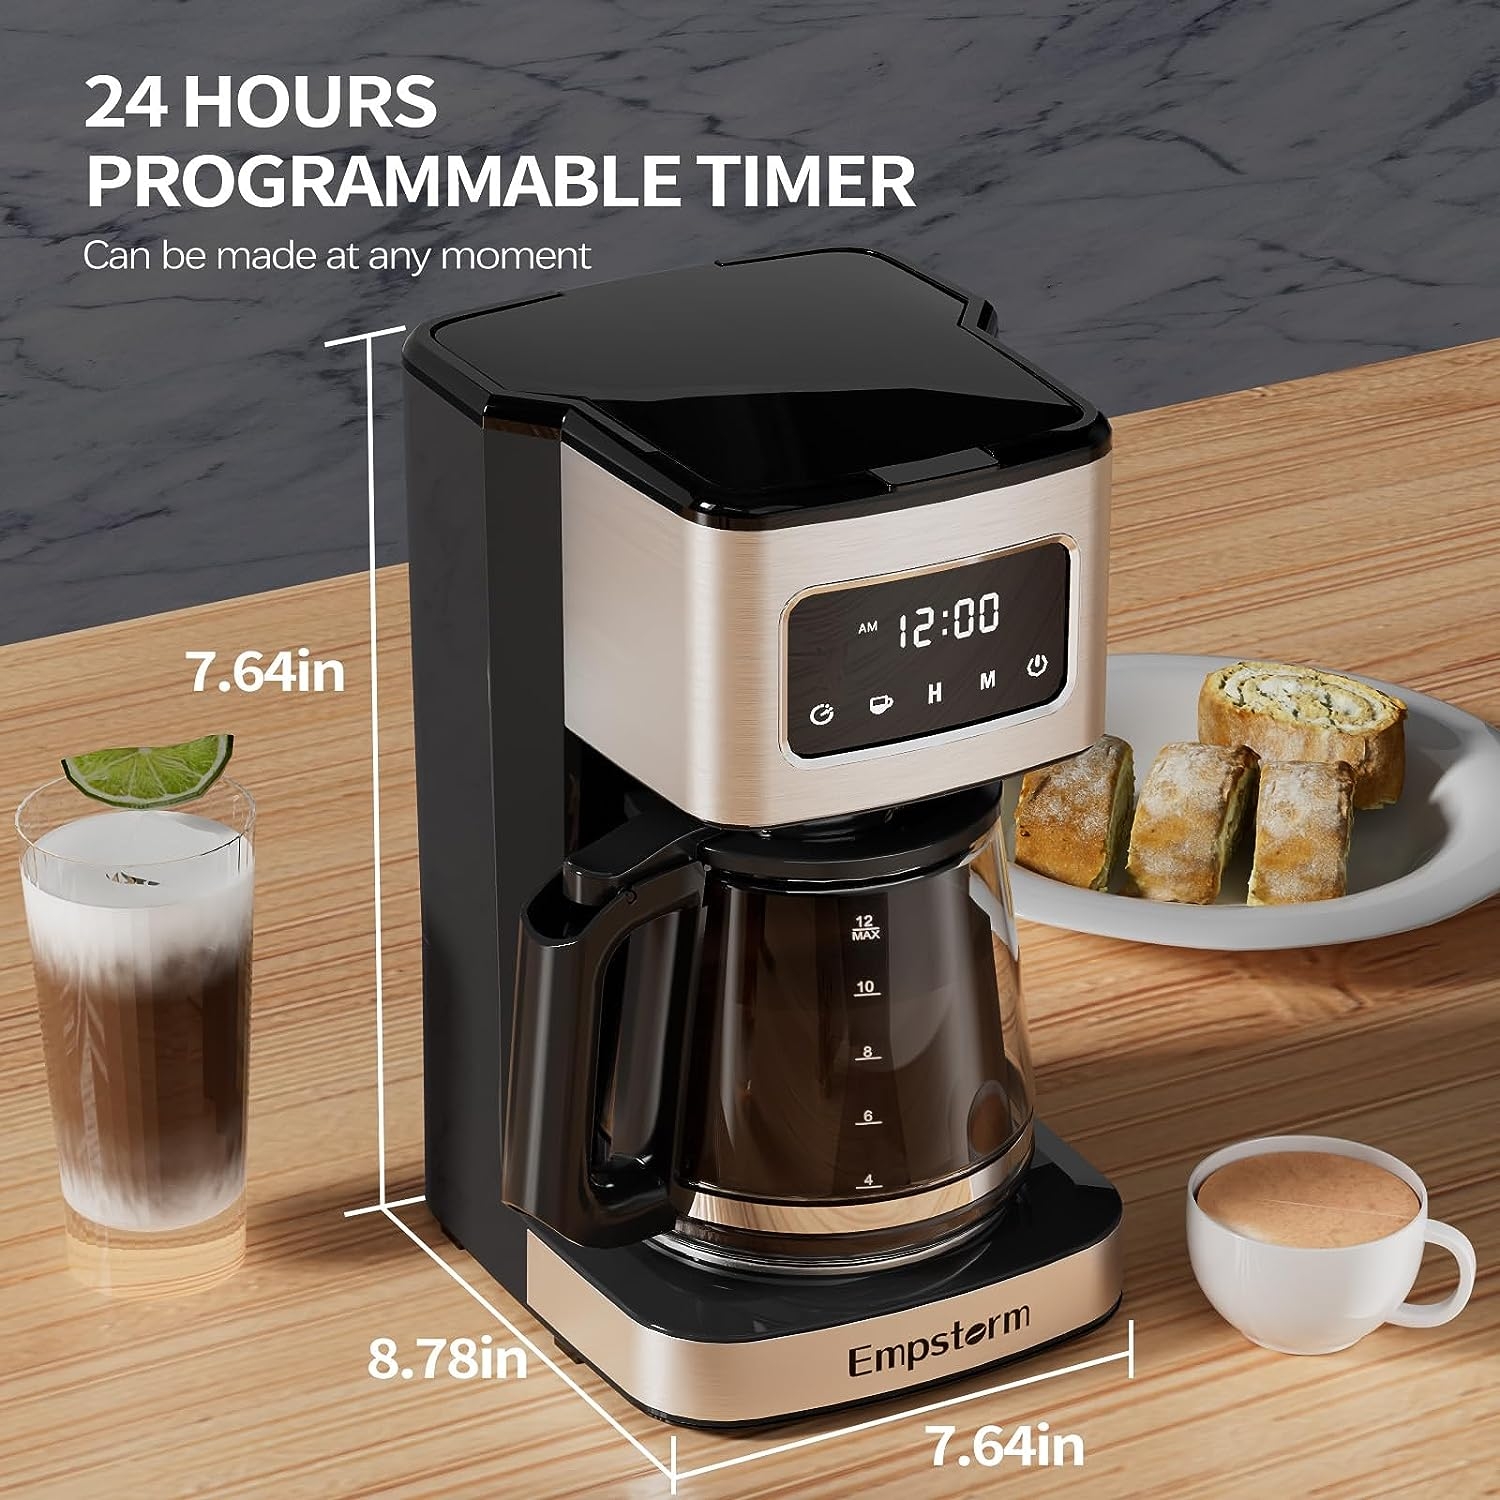 Empstorm 12-Cup Programmable Coffee Maker with Timer and Automatic